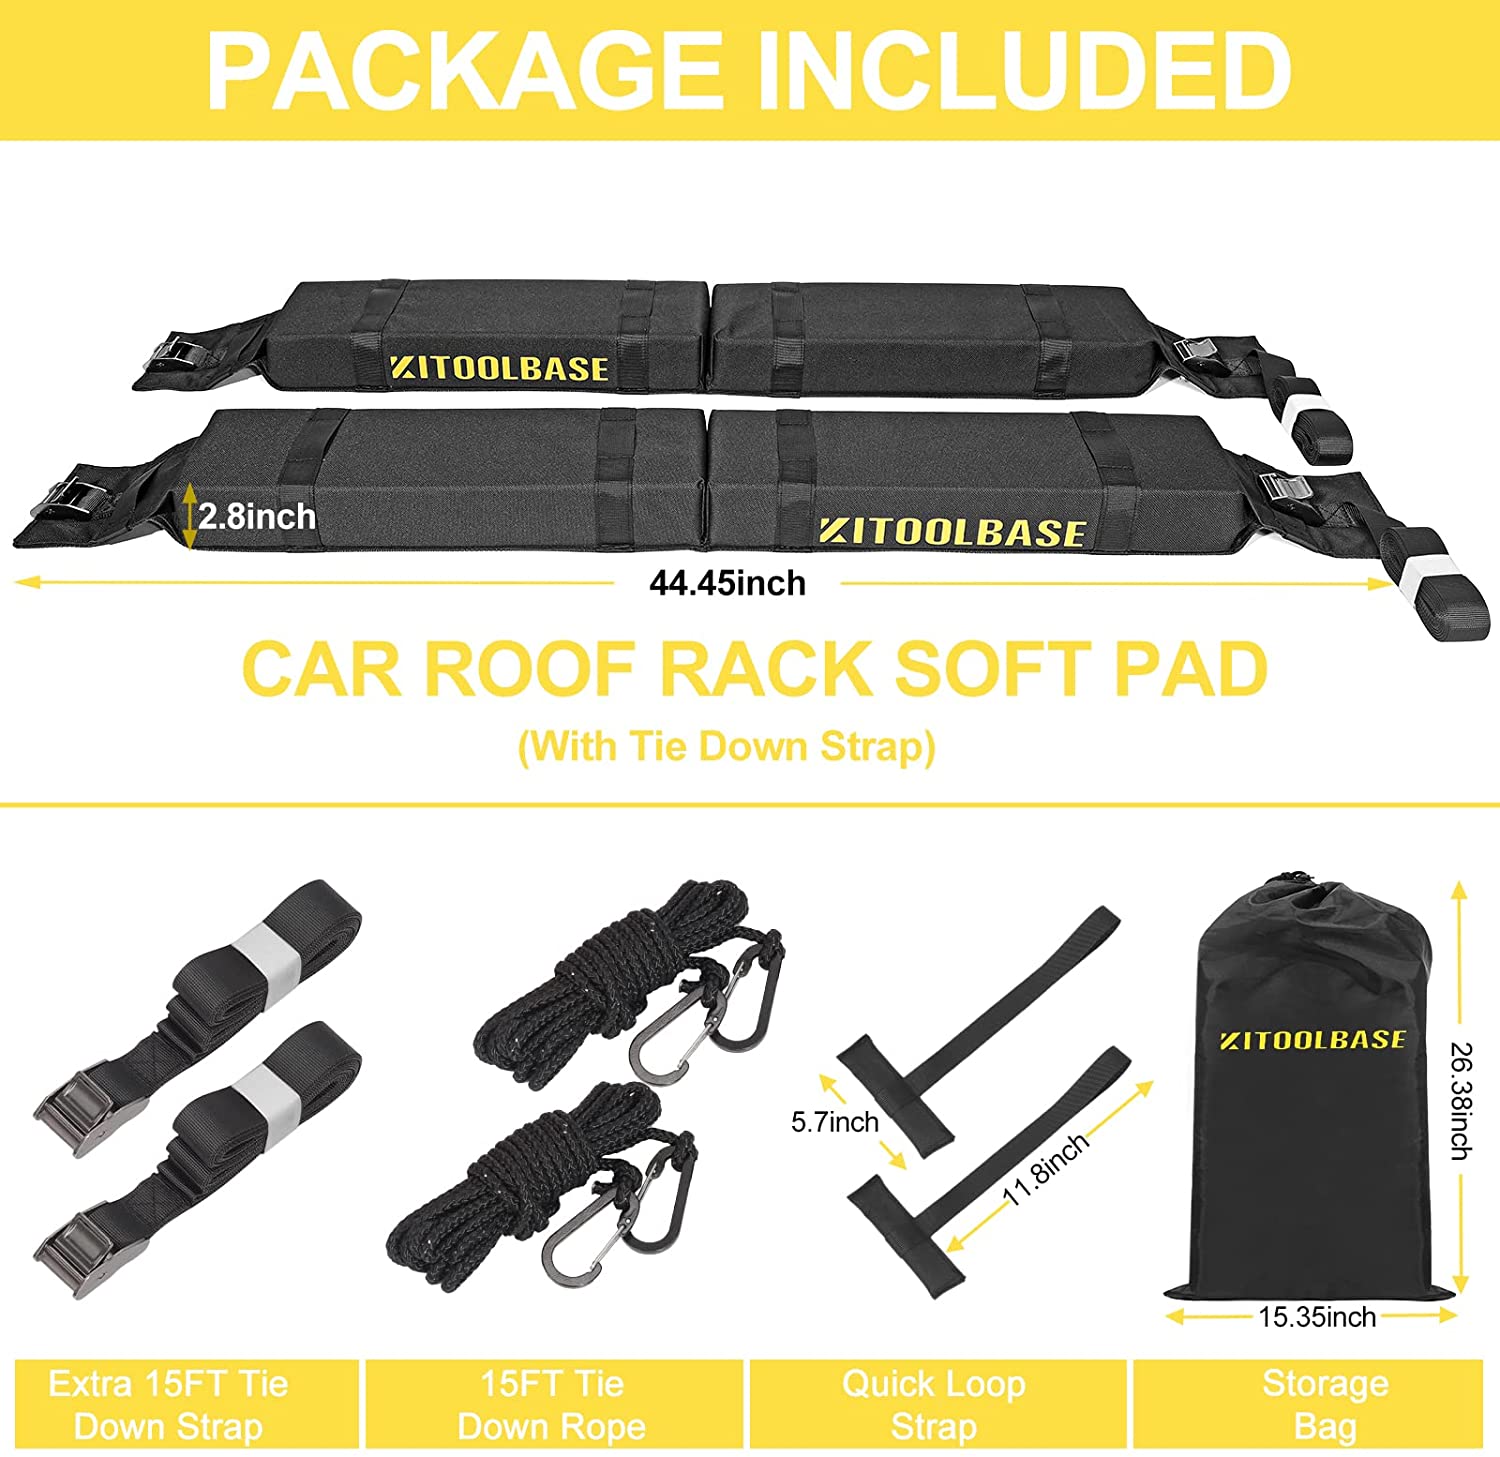 AQUARM Kayak Roof Rack Pads Universal Car Soft Roof Rack for Canoe/Surfboard/Paddle Board/SUP/Snow Board with Adjustable & Steady Tie-Down Straps and Storage Bag 